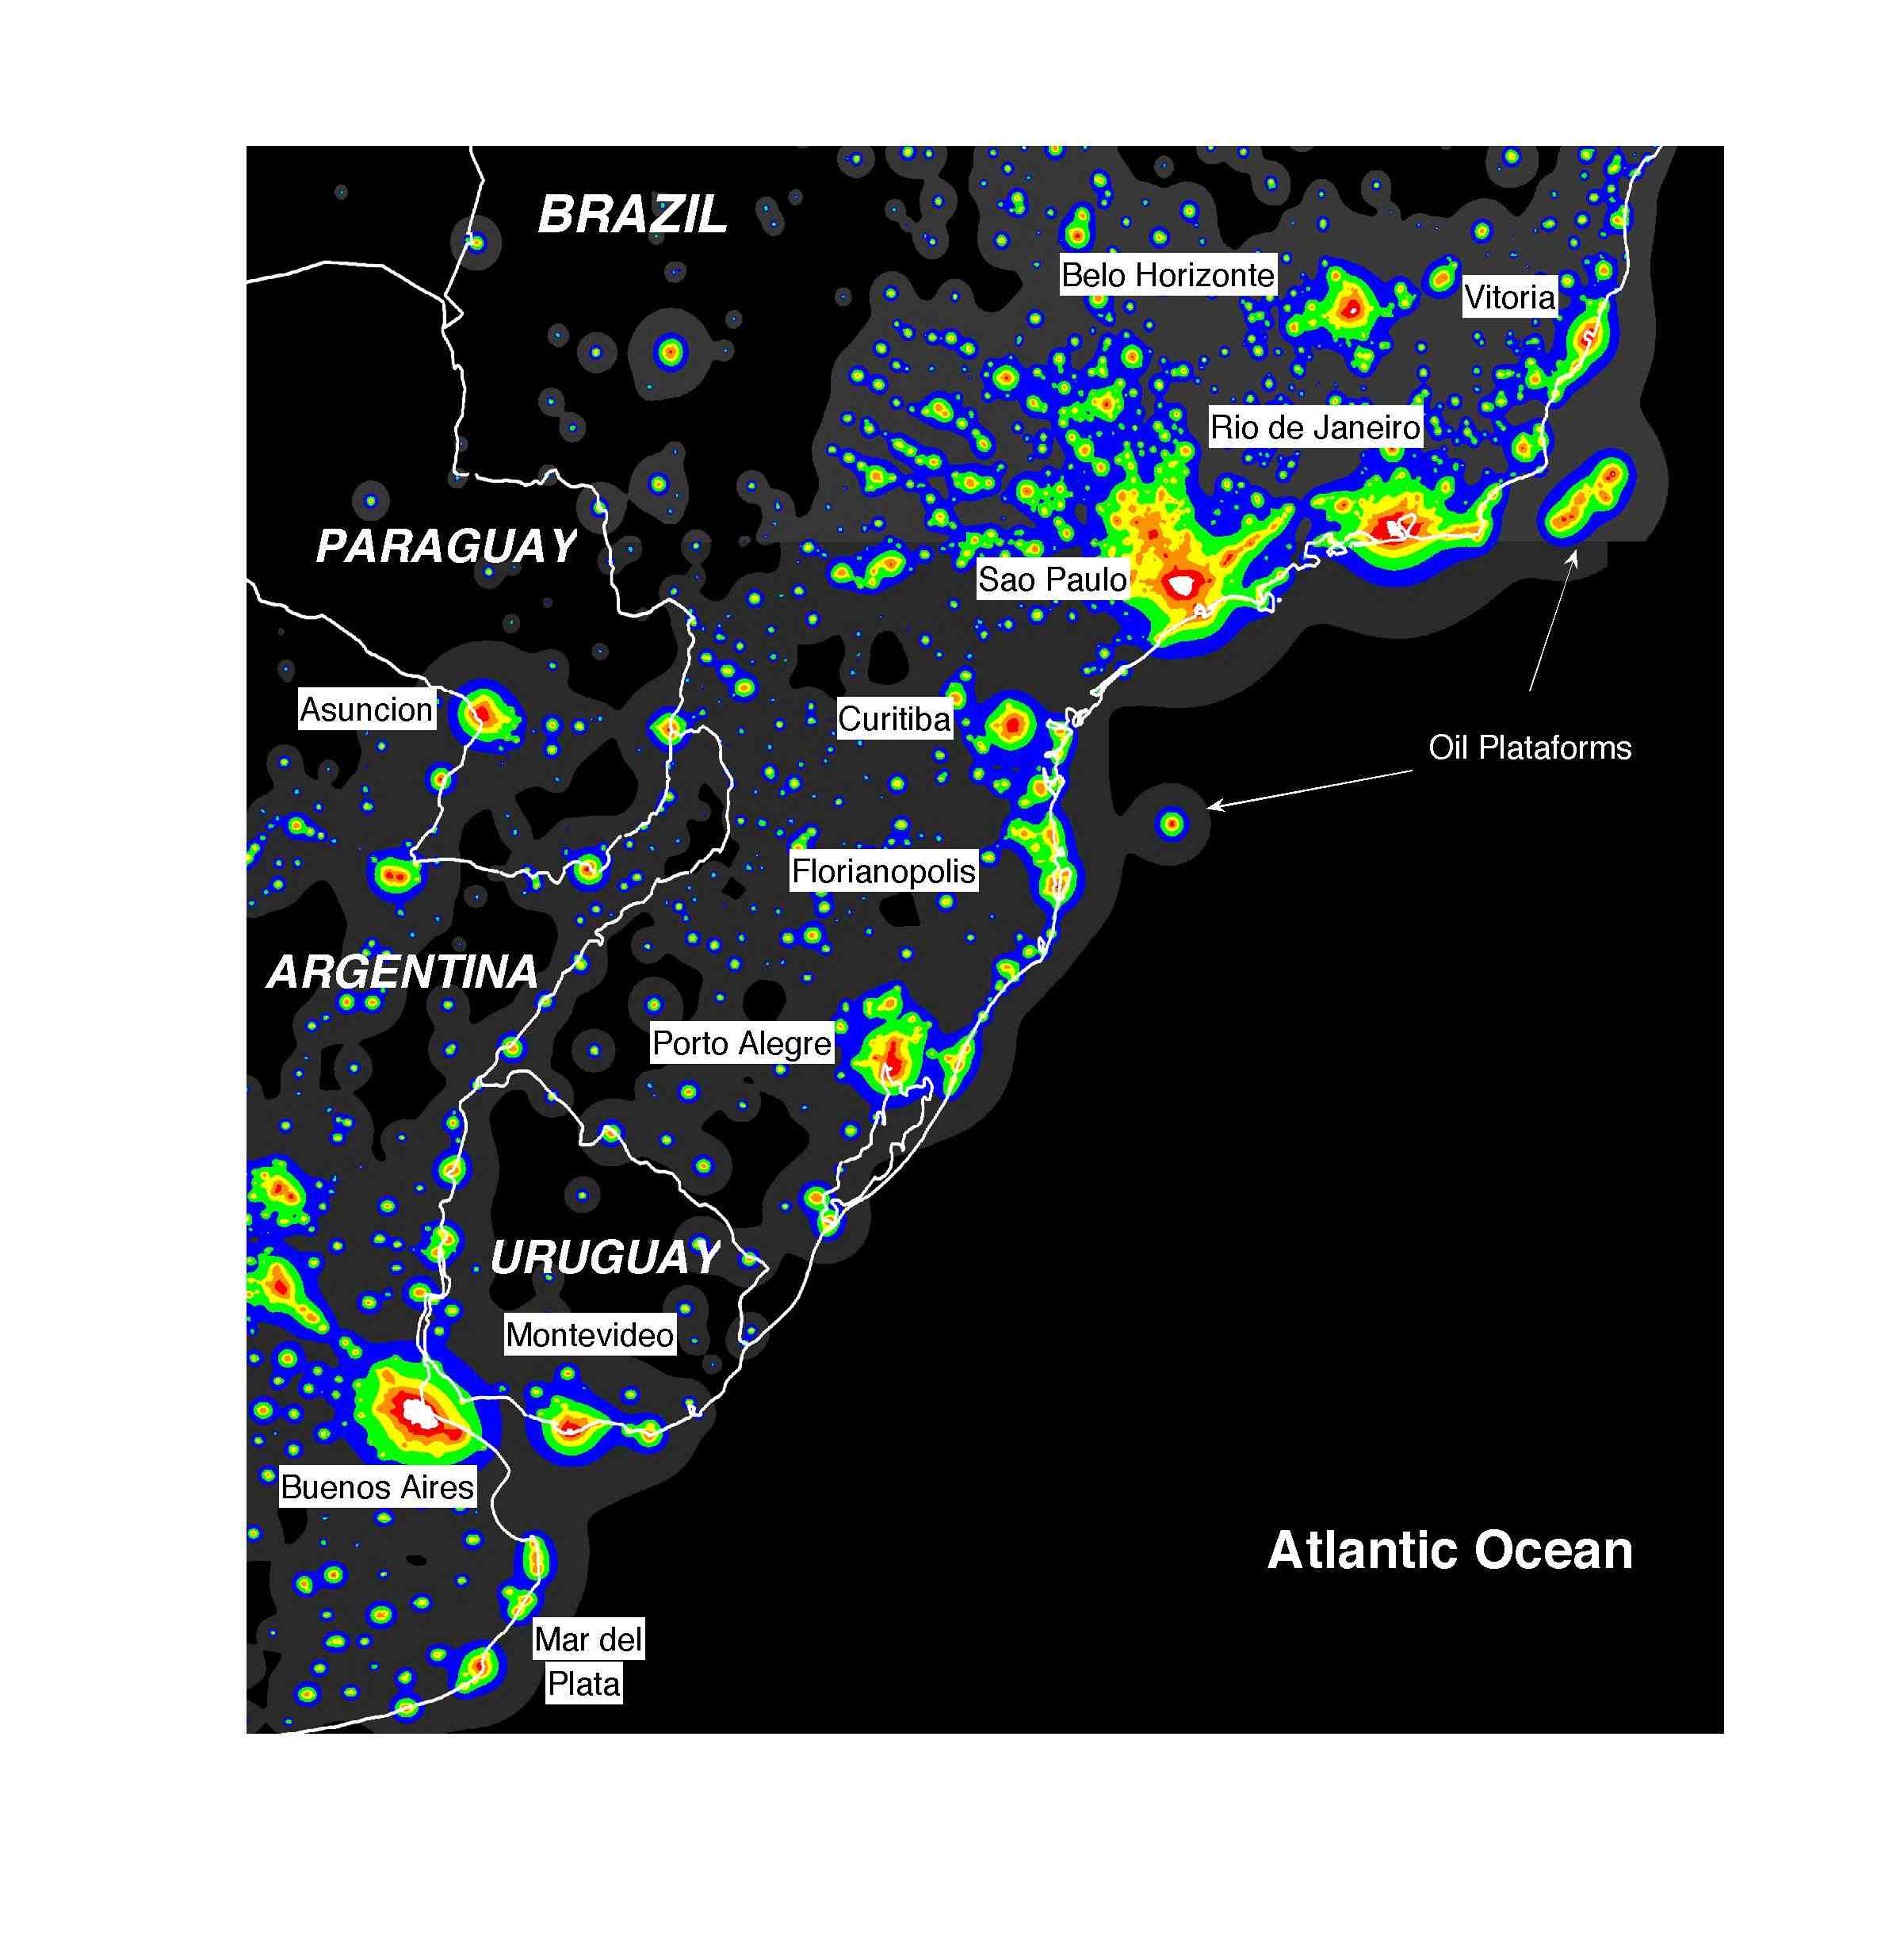 Bright colors indicate population centers in this nighttime image of the offshore study area, along 900 kilometers (559 miles) of Brazil's coast. Two oil platforms were the only ground-based sources of surface wind speed data. (From F. Pimenta, courtesy Elsevier Renewable Energy)